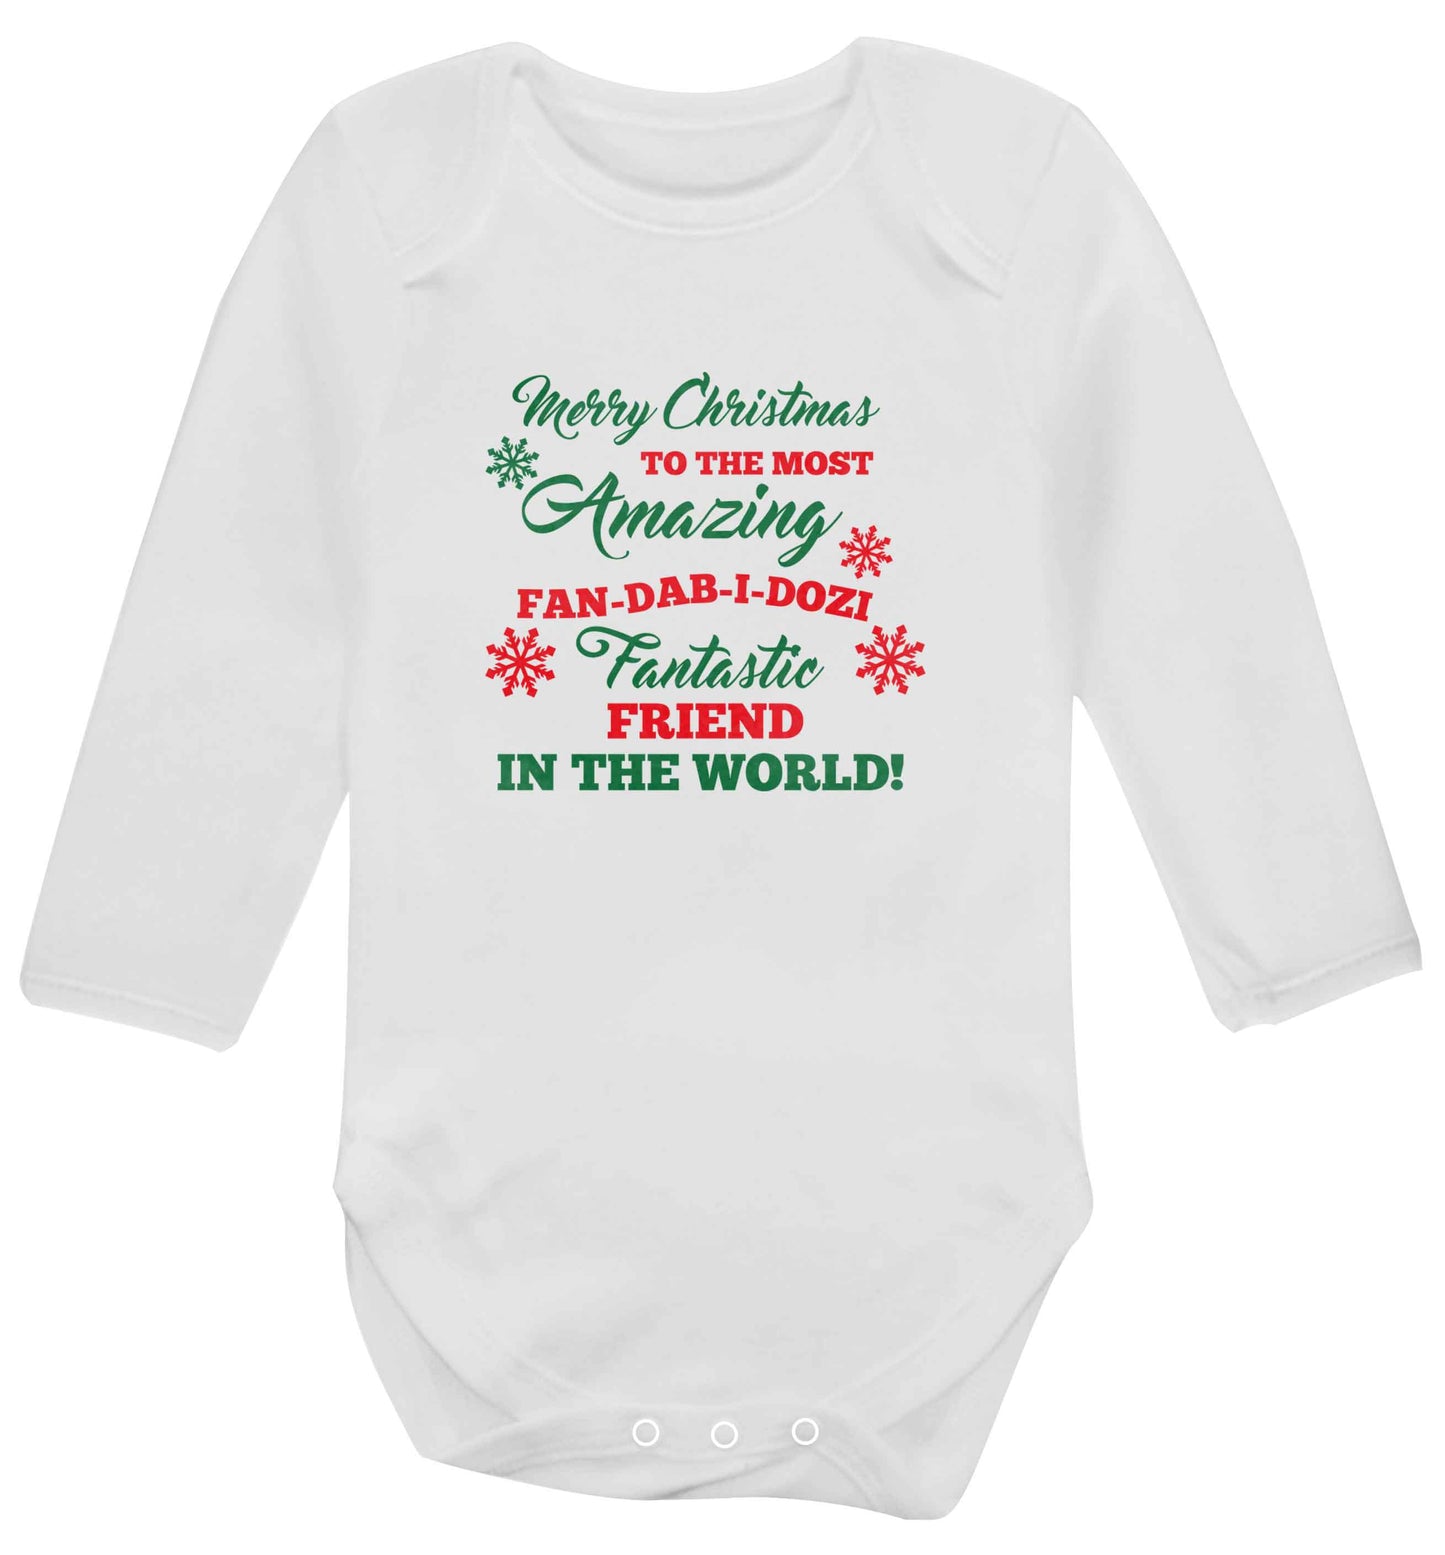 Merry Christmas to the most amazing fan-dab-i-dozi fantasic friend in the world baby vest long sleeved white 6-12 months